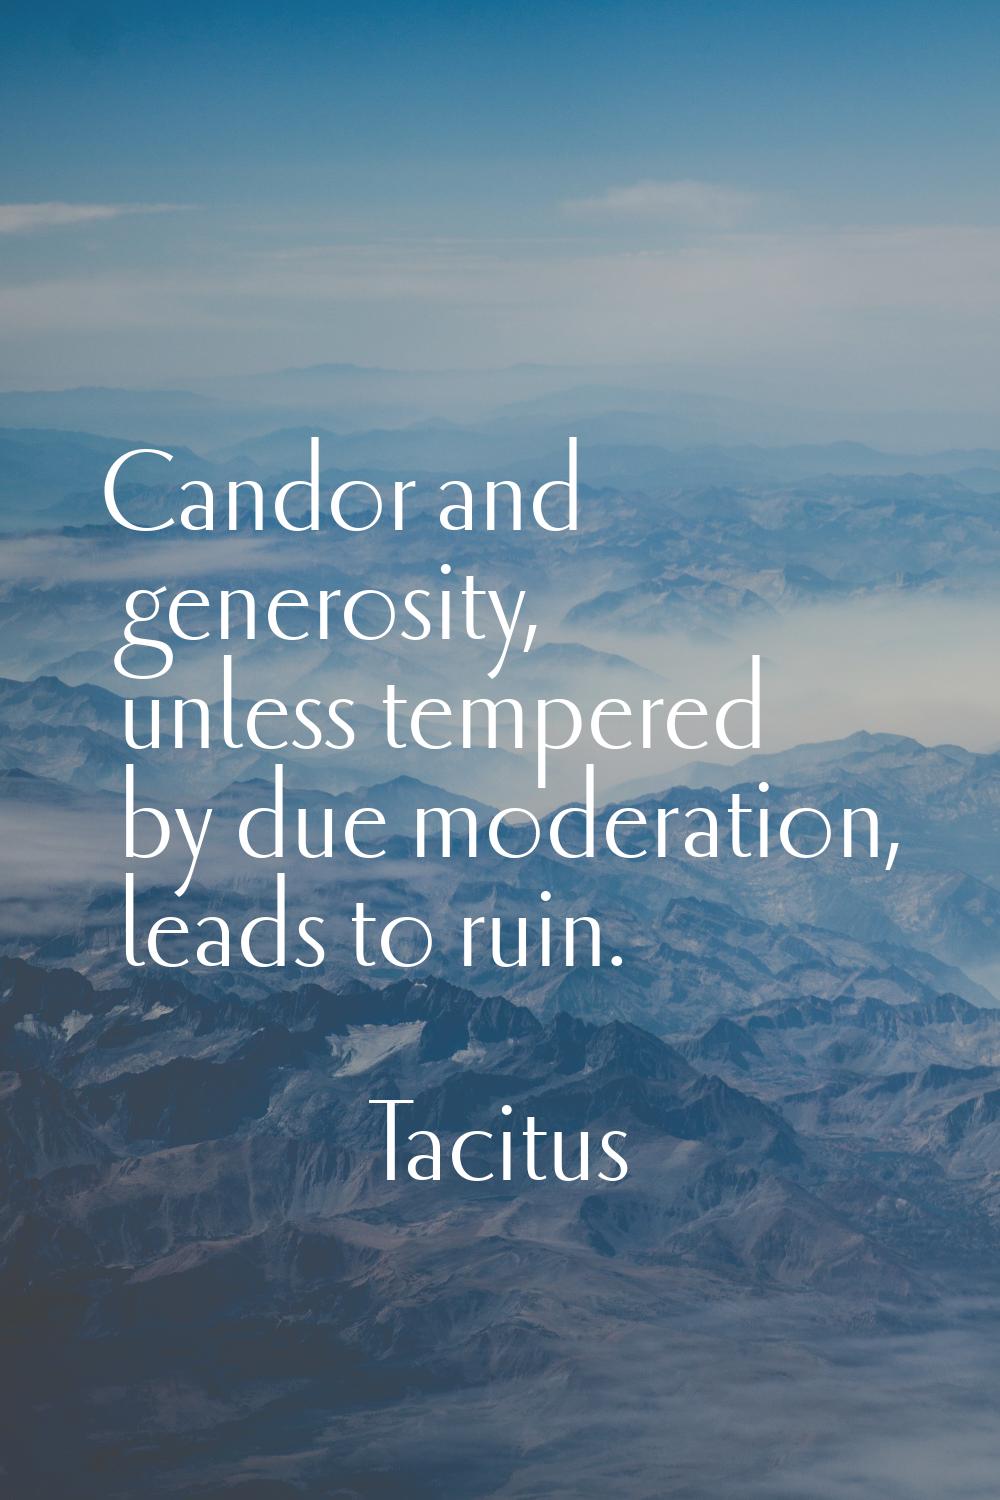 Candor and generosity, unless tempered by due moderation, leads to ruin.